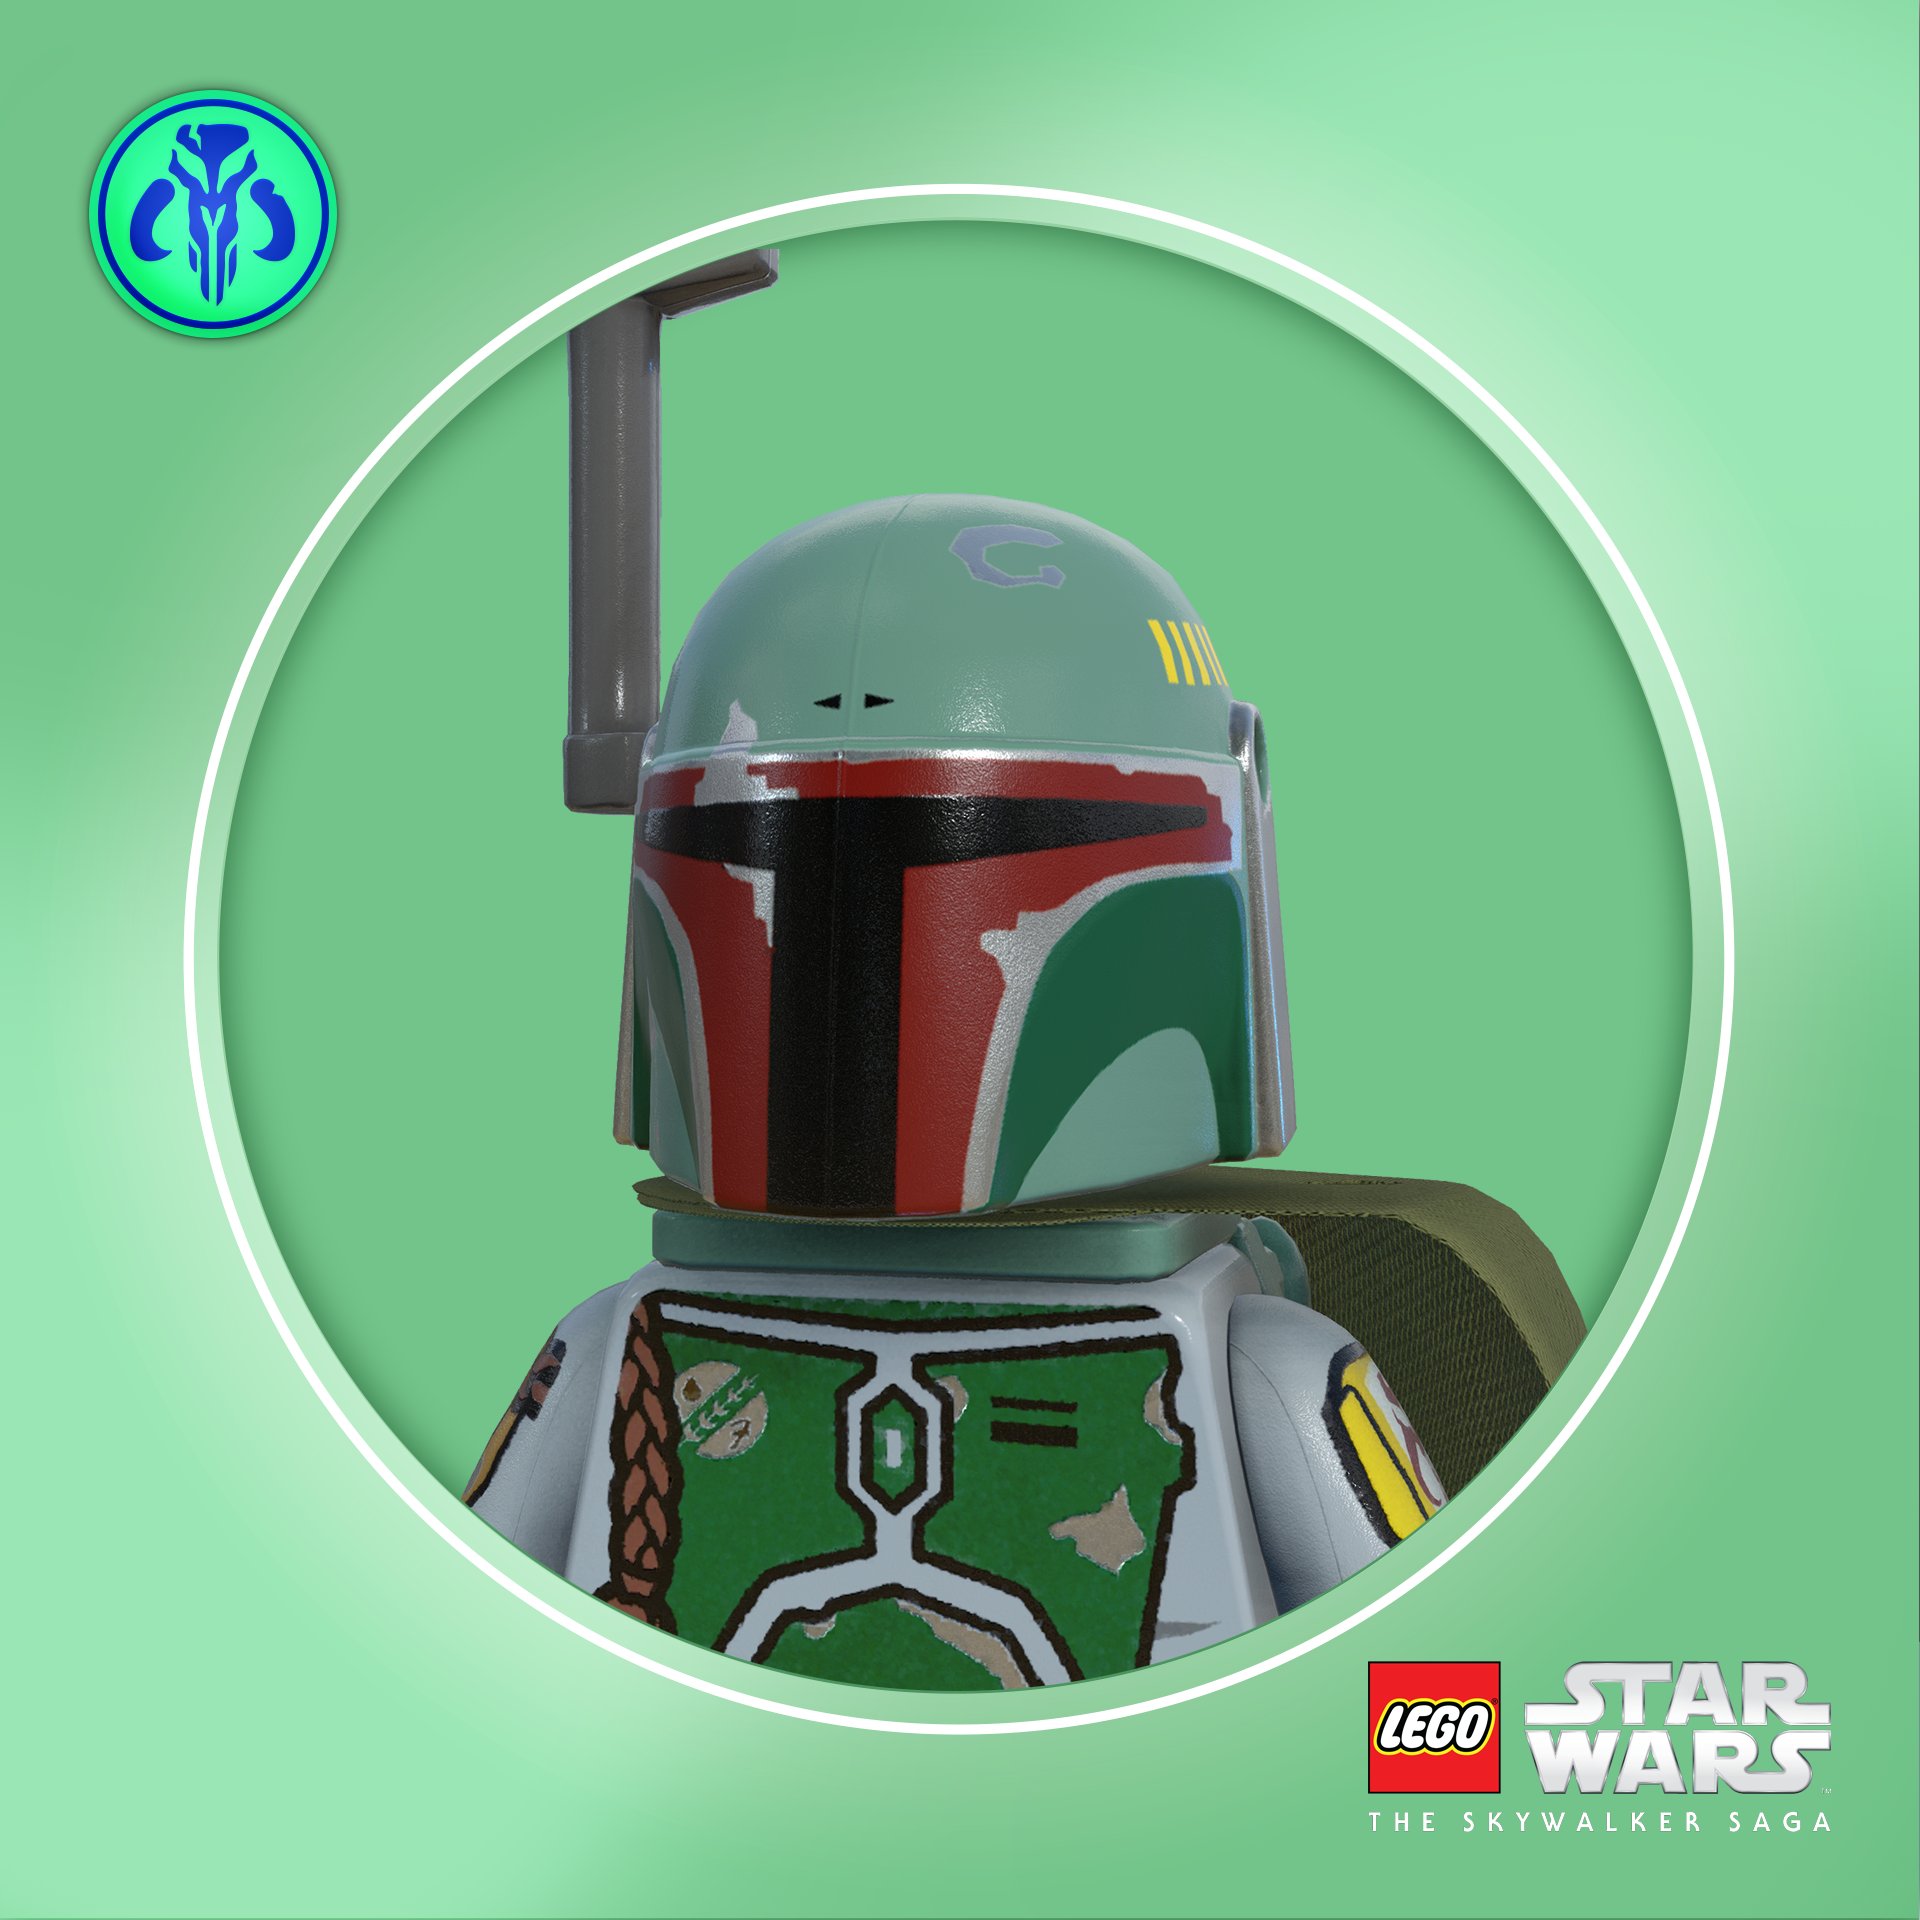 Lego Star Wars Game Feel The Power Of The Dark Side With This New Batch Of Profile Pics Come Back Tomorrow For More Characters Legostarwarsgame T Co Otthss9tin Twitter